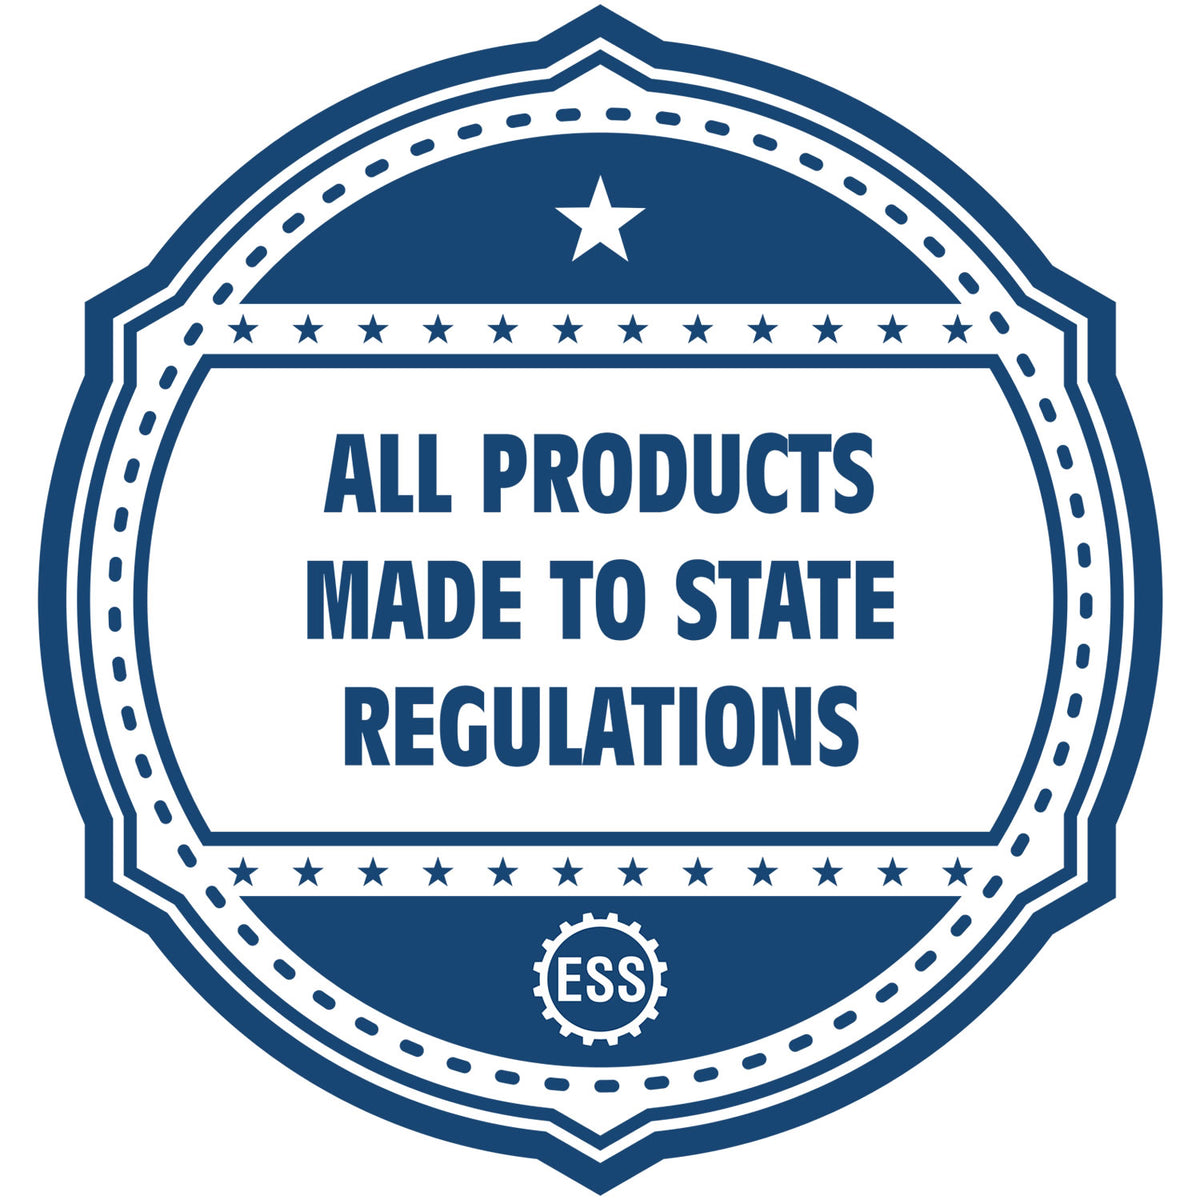 An icon or badge element for the Long Reach Colorado Land Surveyor Seal showing that this product is made in compliance with state regulations.